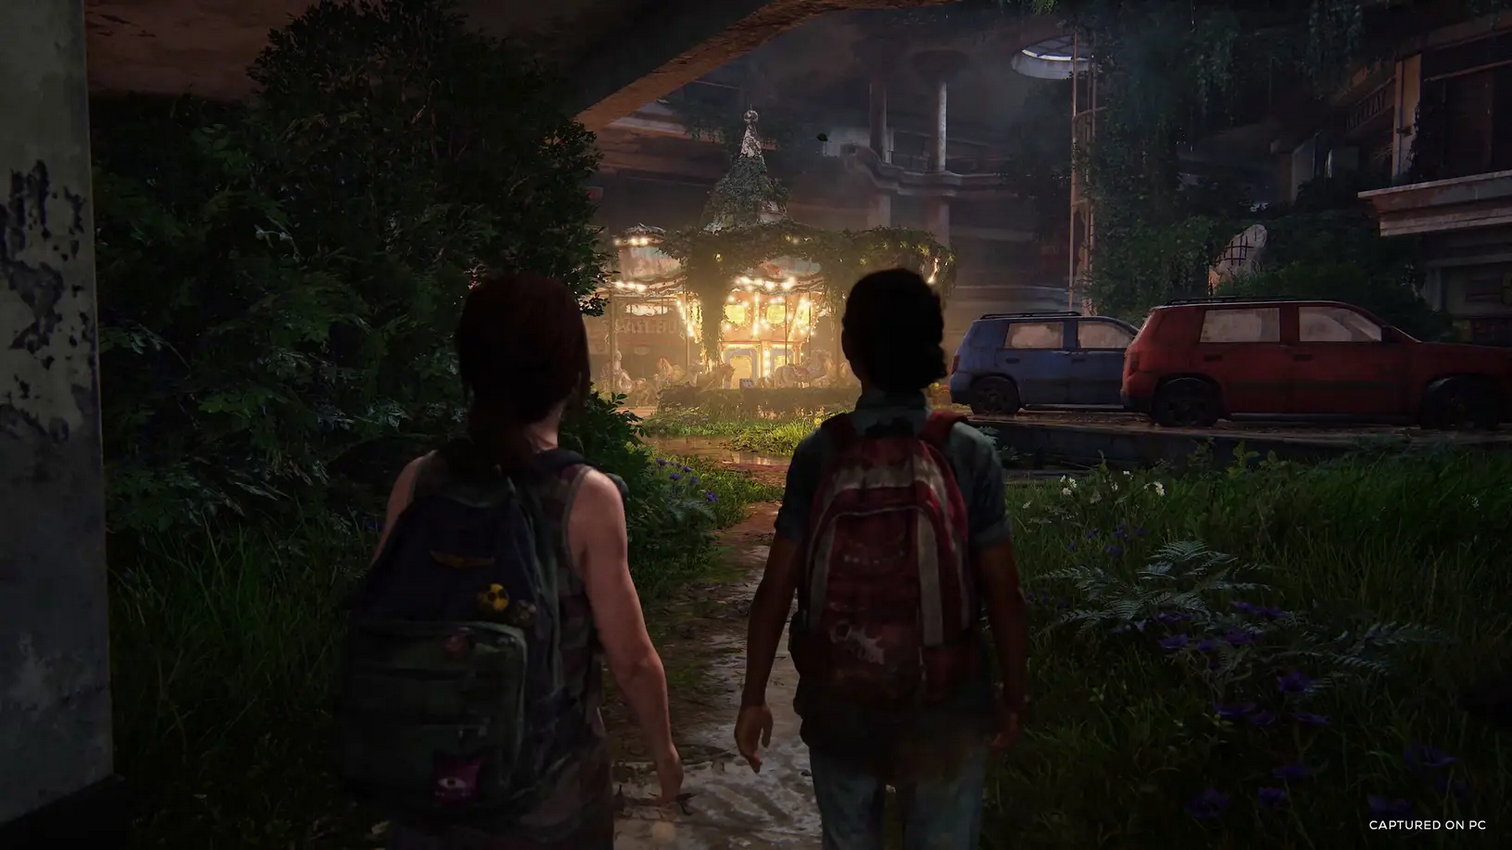 Will The Last of Us Part 1 be on Steam? - Gameranx